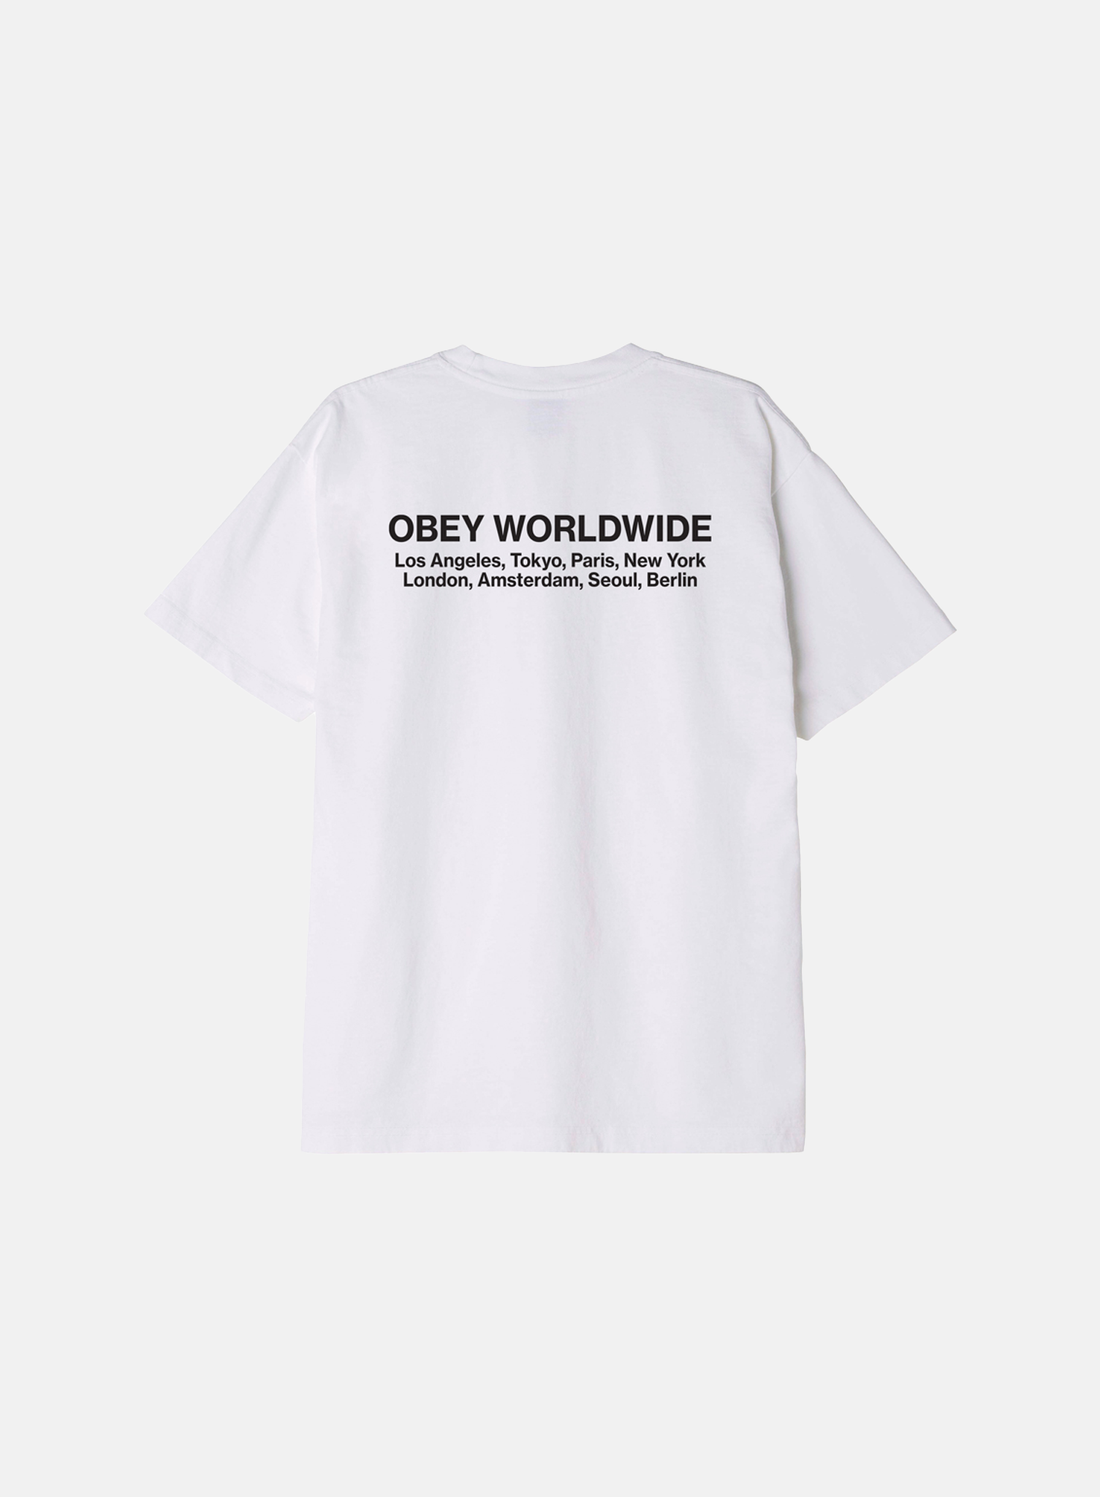 OBEY Worldwide Cities Tee White - Hympala Store 